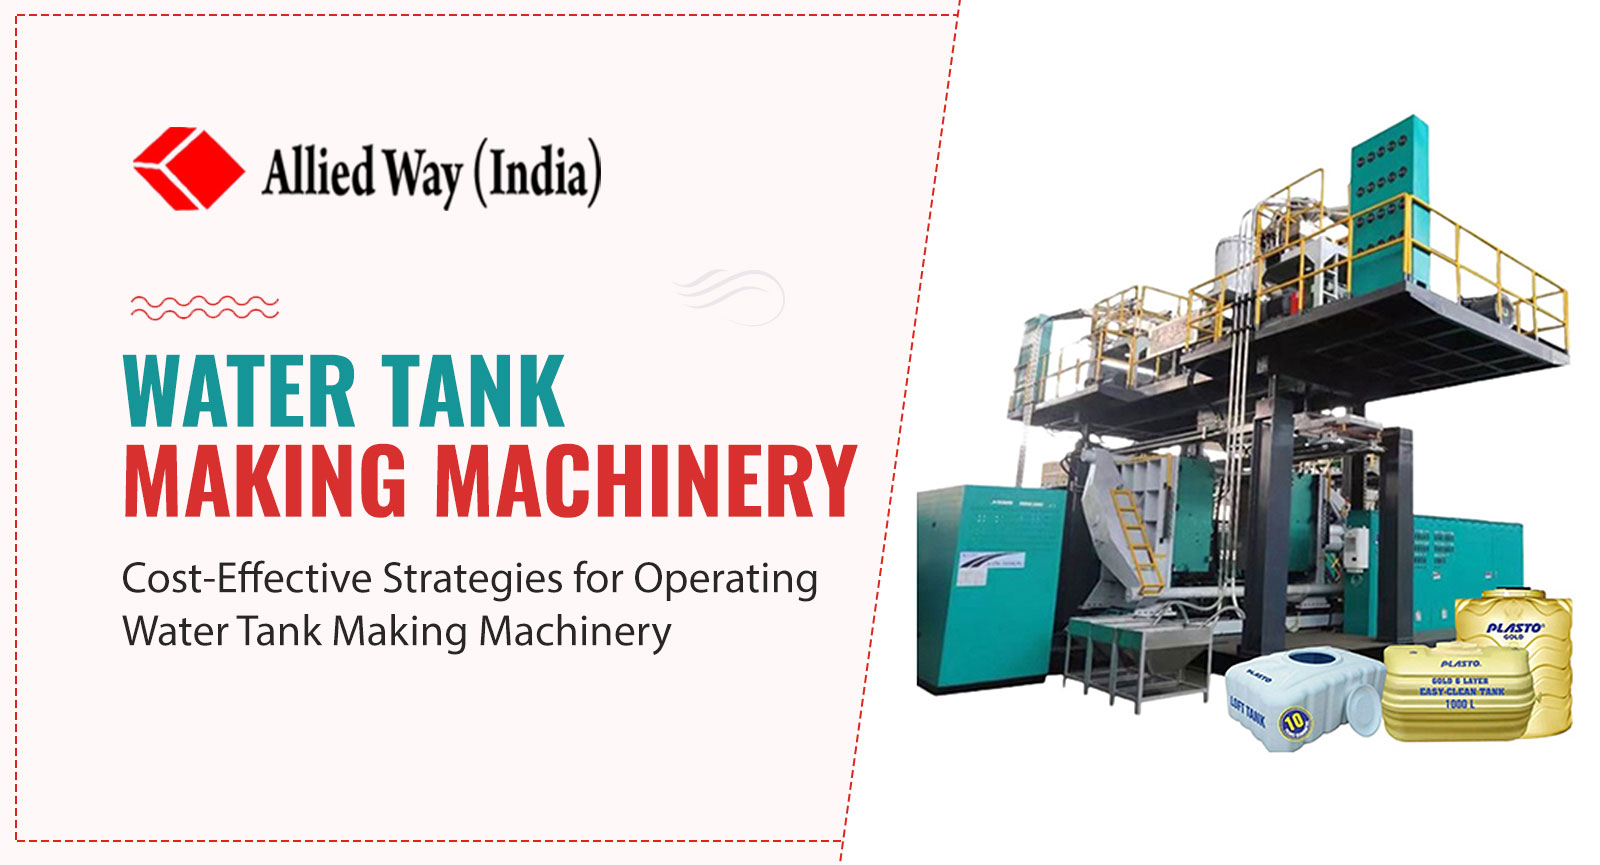 Cost-Effective Strategies for Operating Water Tank Making Machinery, Allied Way (India)